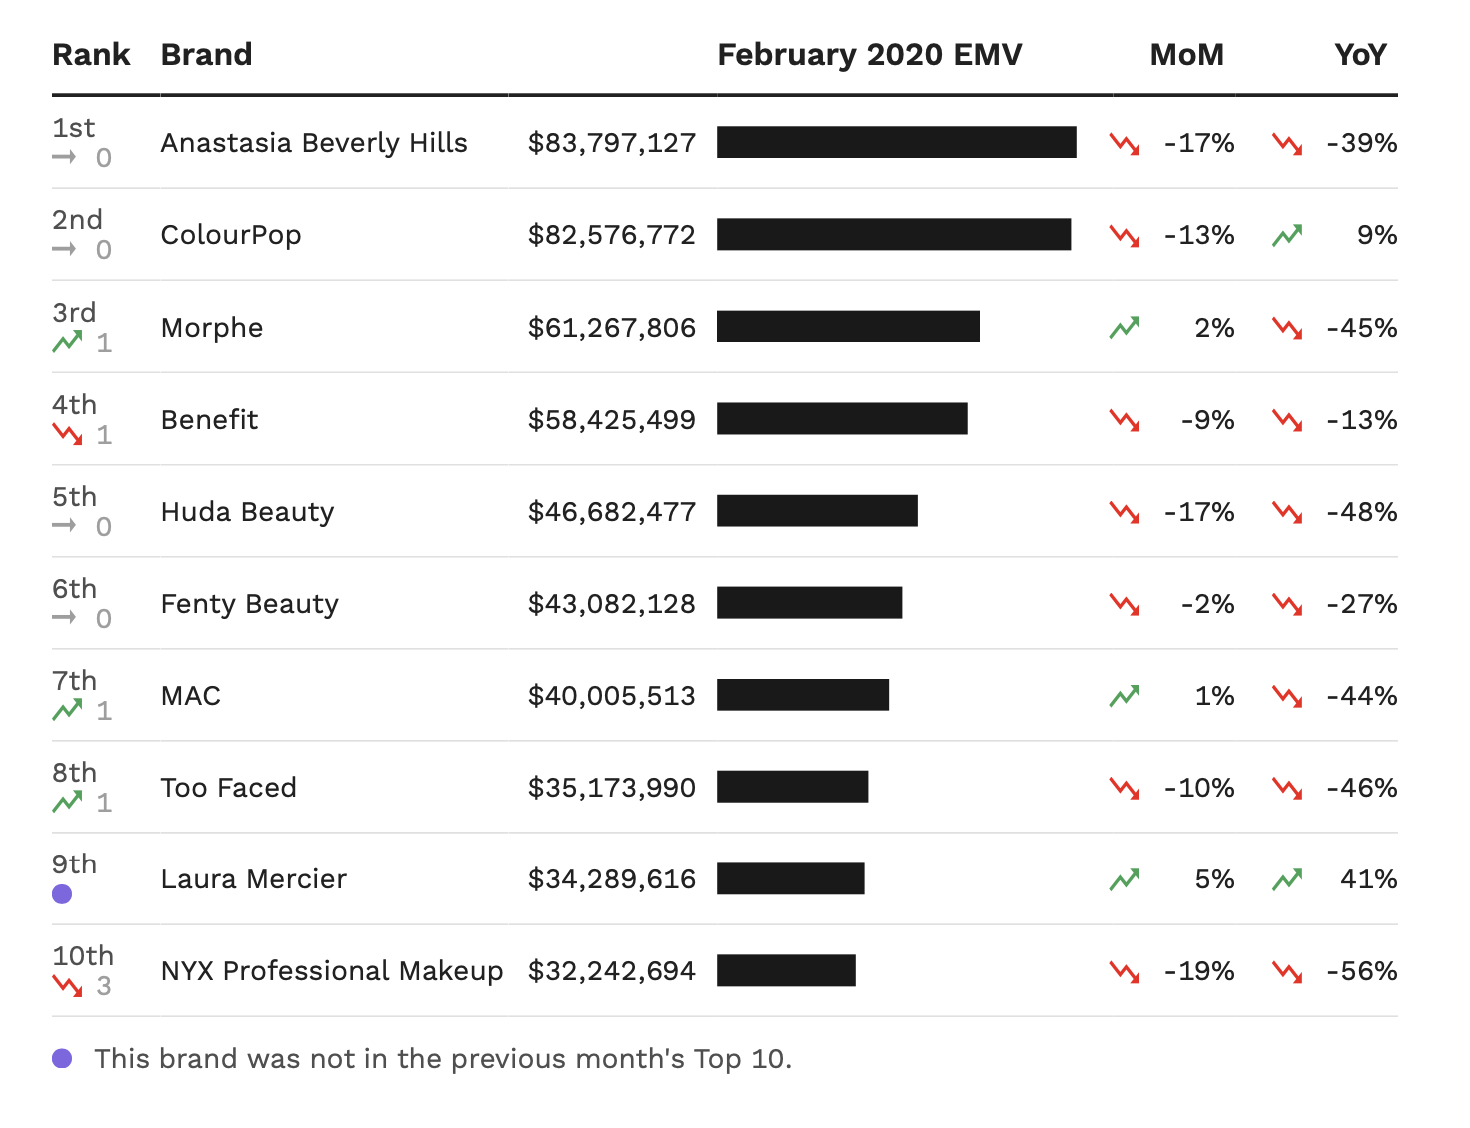 A chart showing the top 10 makeup brands in the U.S. by February EMV performance.